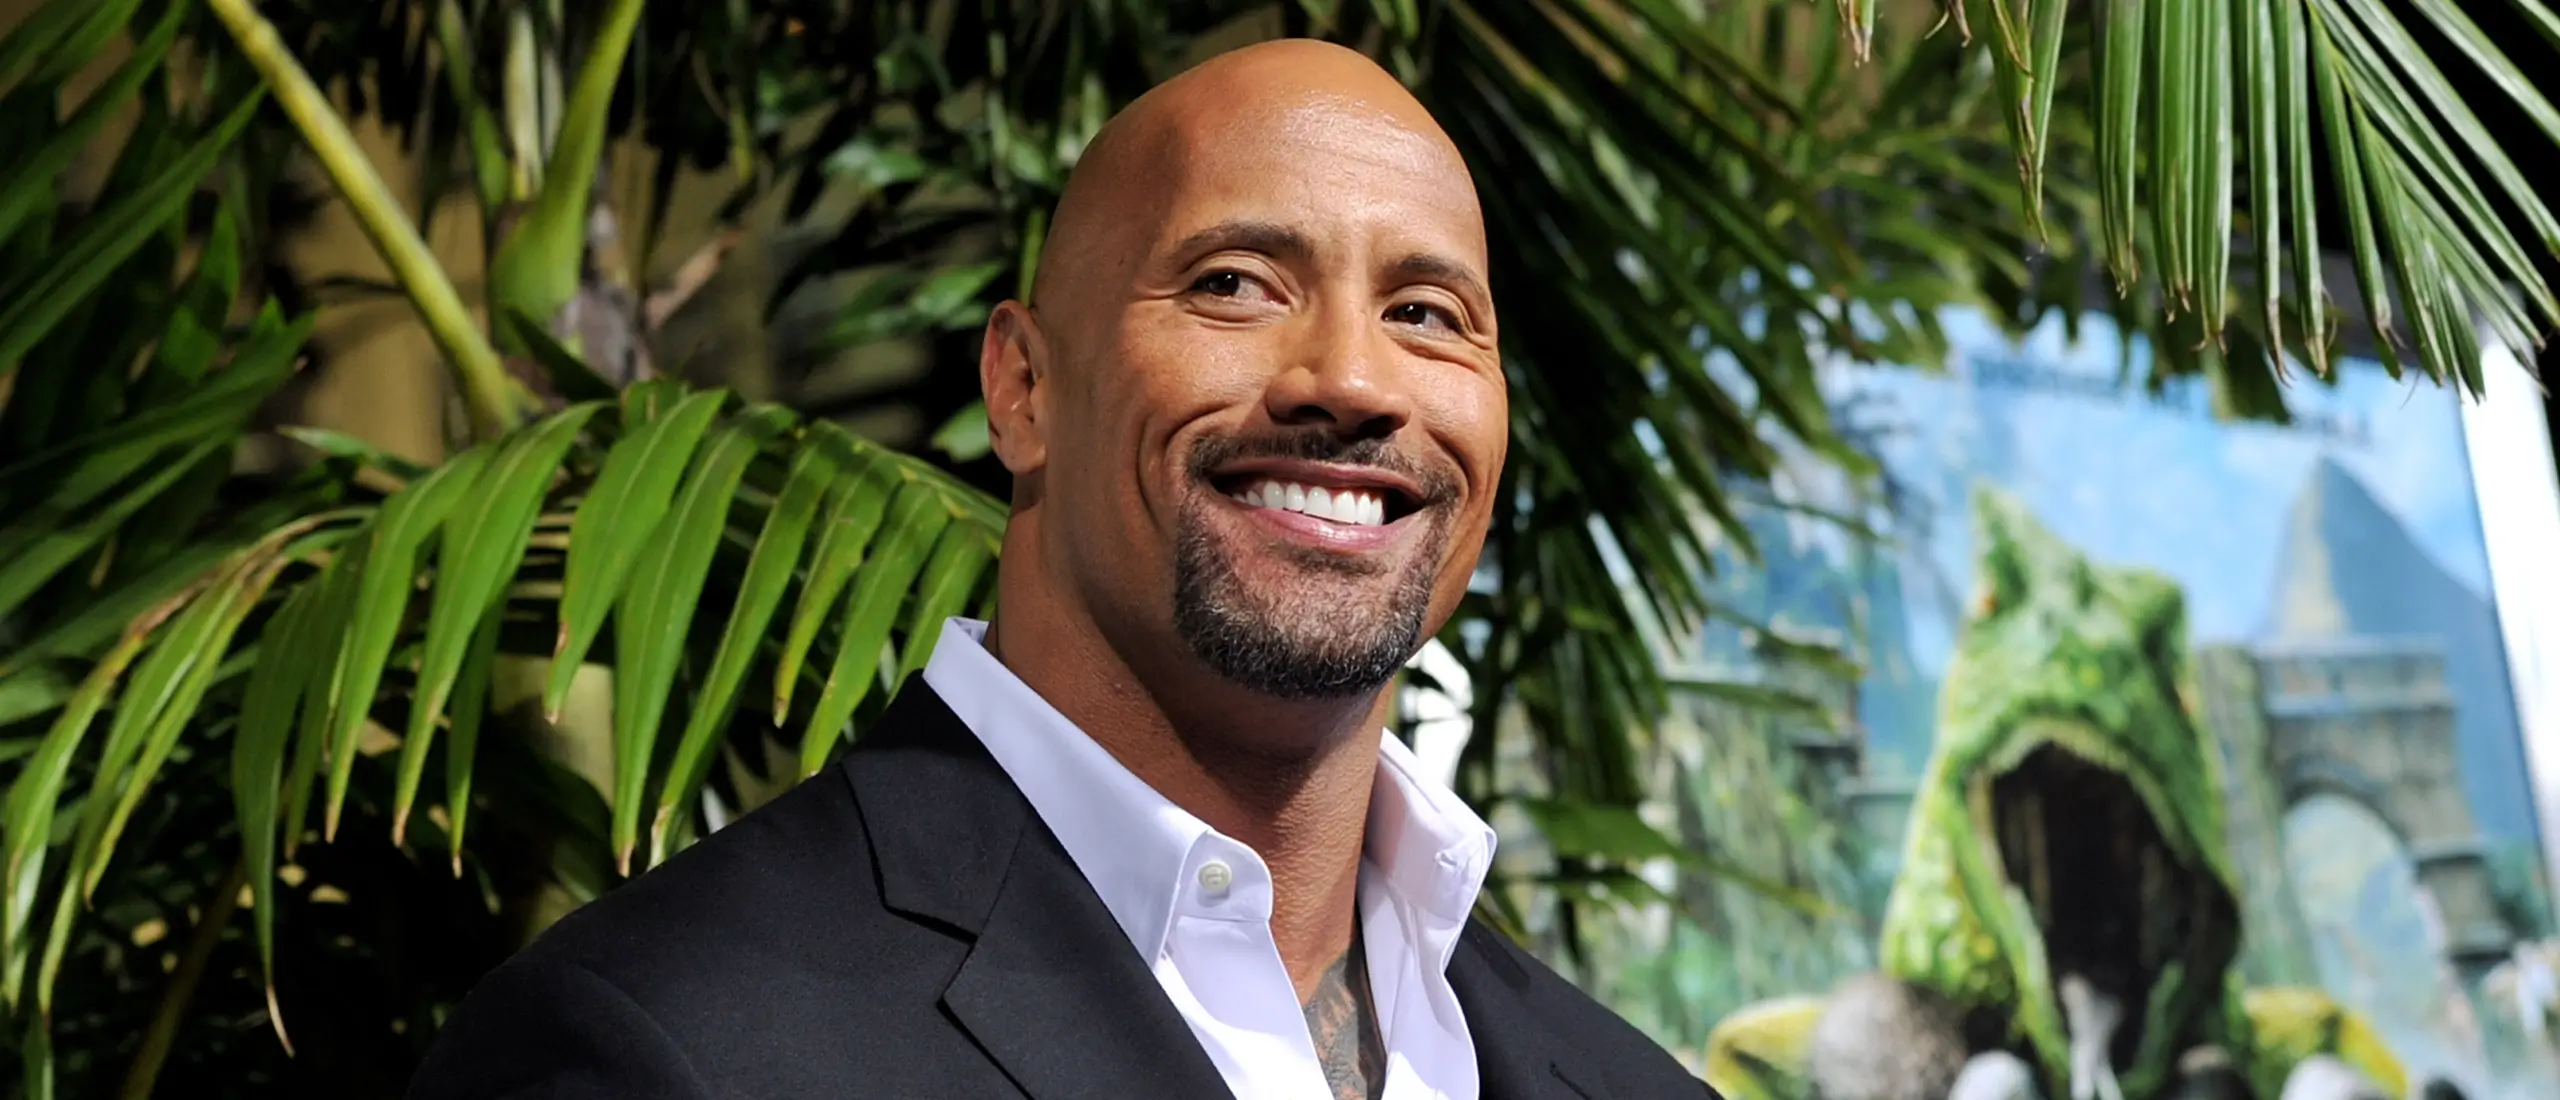 dwayne the rock looking devilishly handsome in a tropical setting